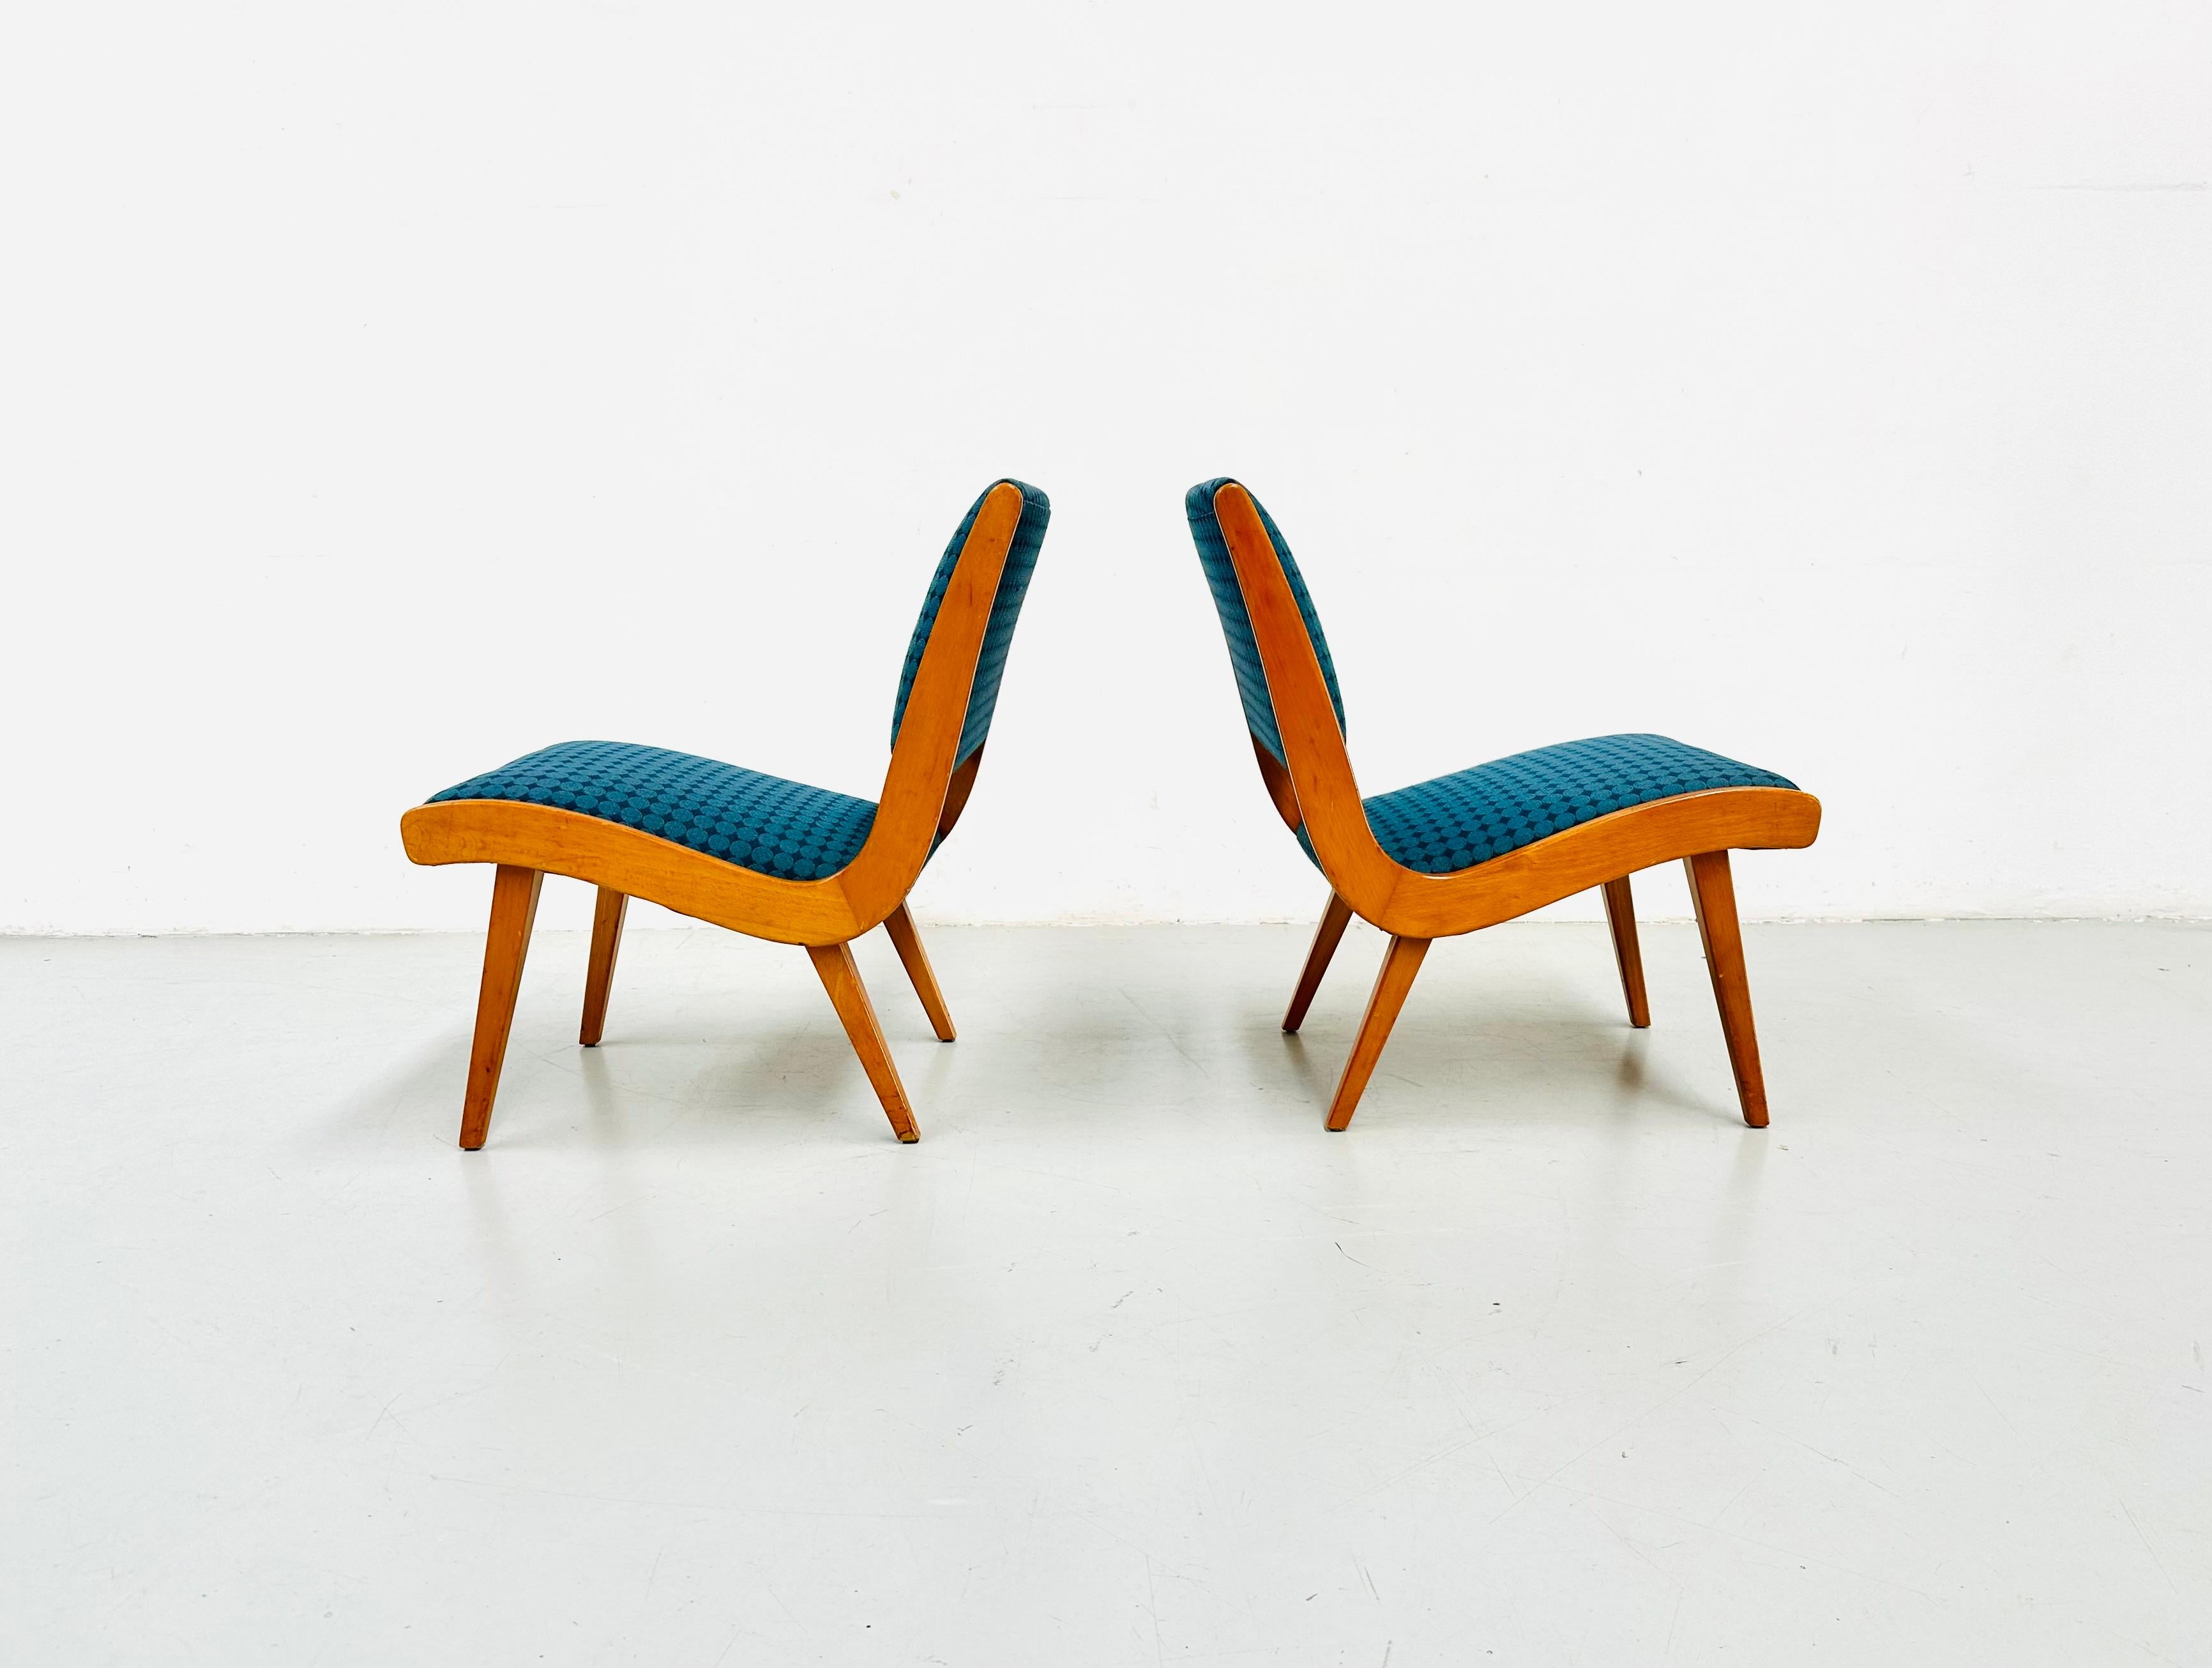 1950s Rare Set Vostra Chairs Numbered & Original Fabric by Jens Risom for Knoll. en vente 3